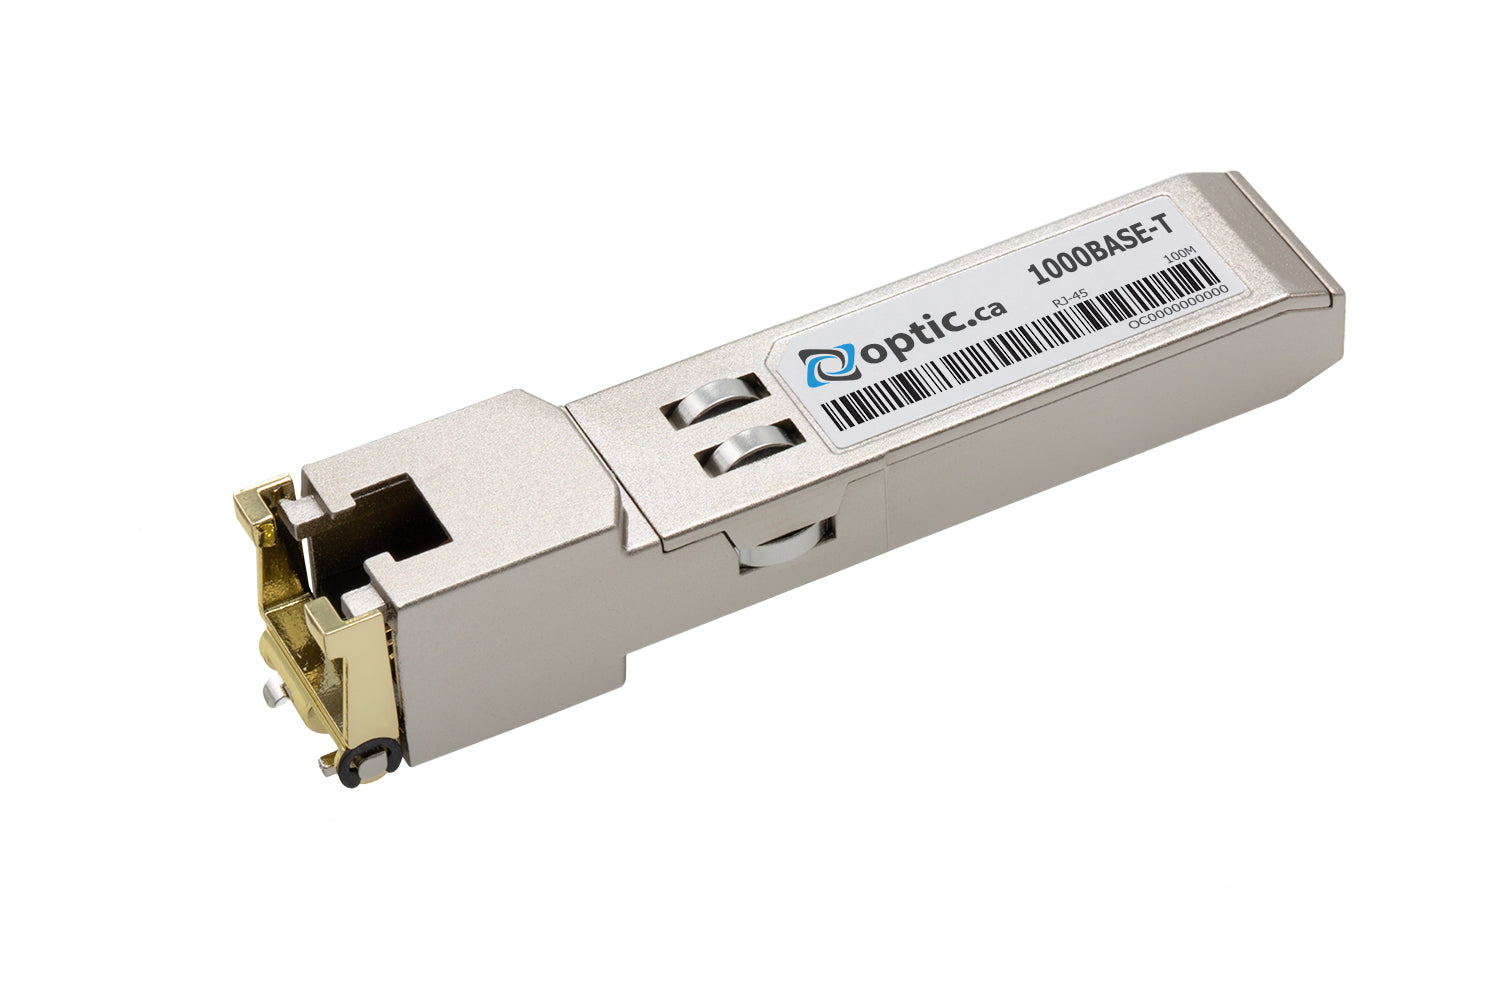 OPTIC.CA - 1000BASE-T SFP - 10070H-OC - EXTREME NETWORKS COMPATIBLE